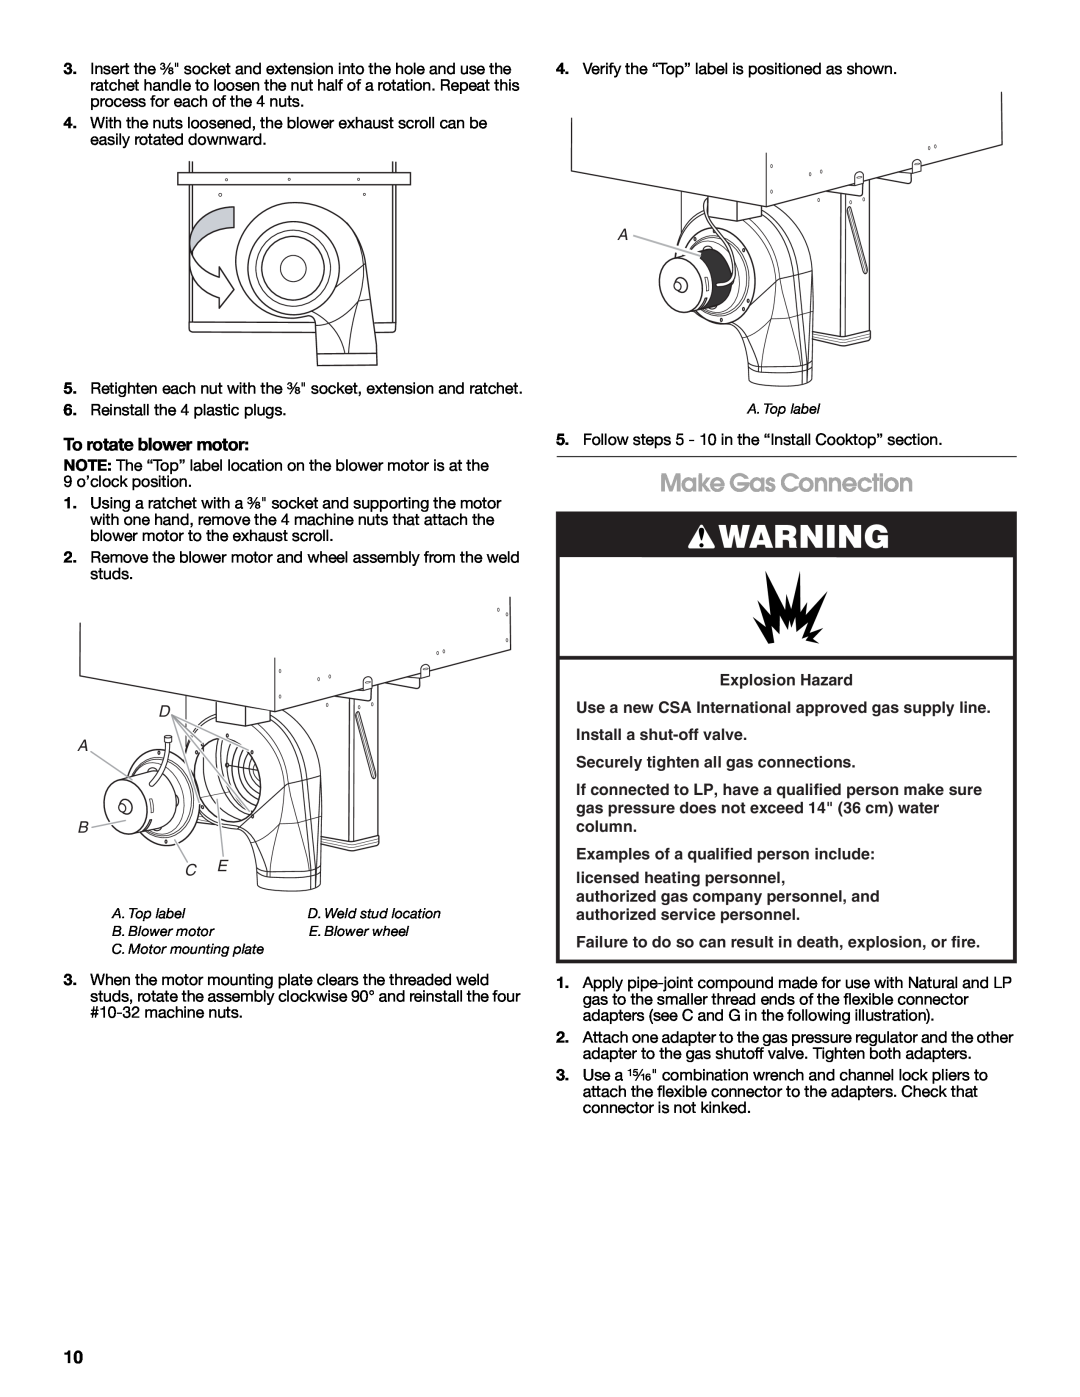 Jenn-Air W10197058B installation instructions Make Gas Connection, To rotate blower motor, D A B 